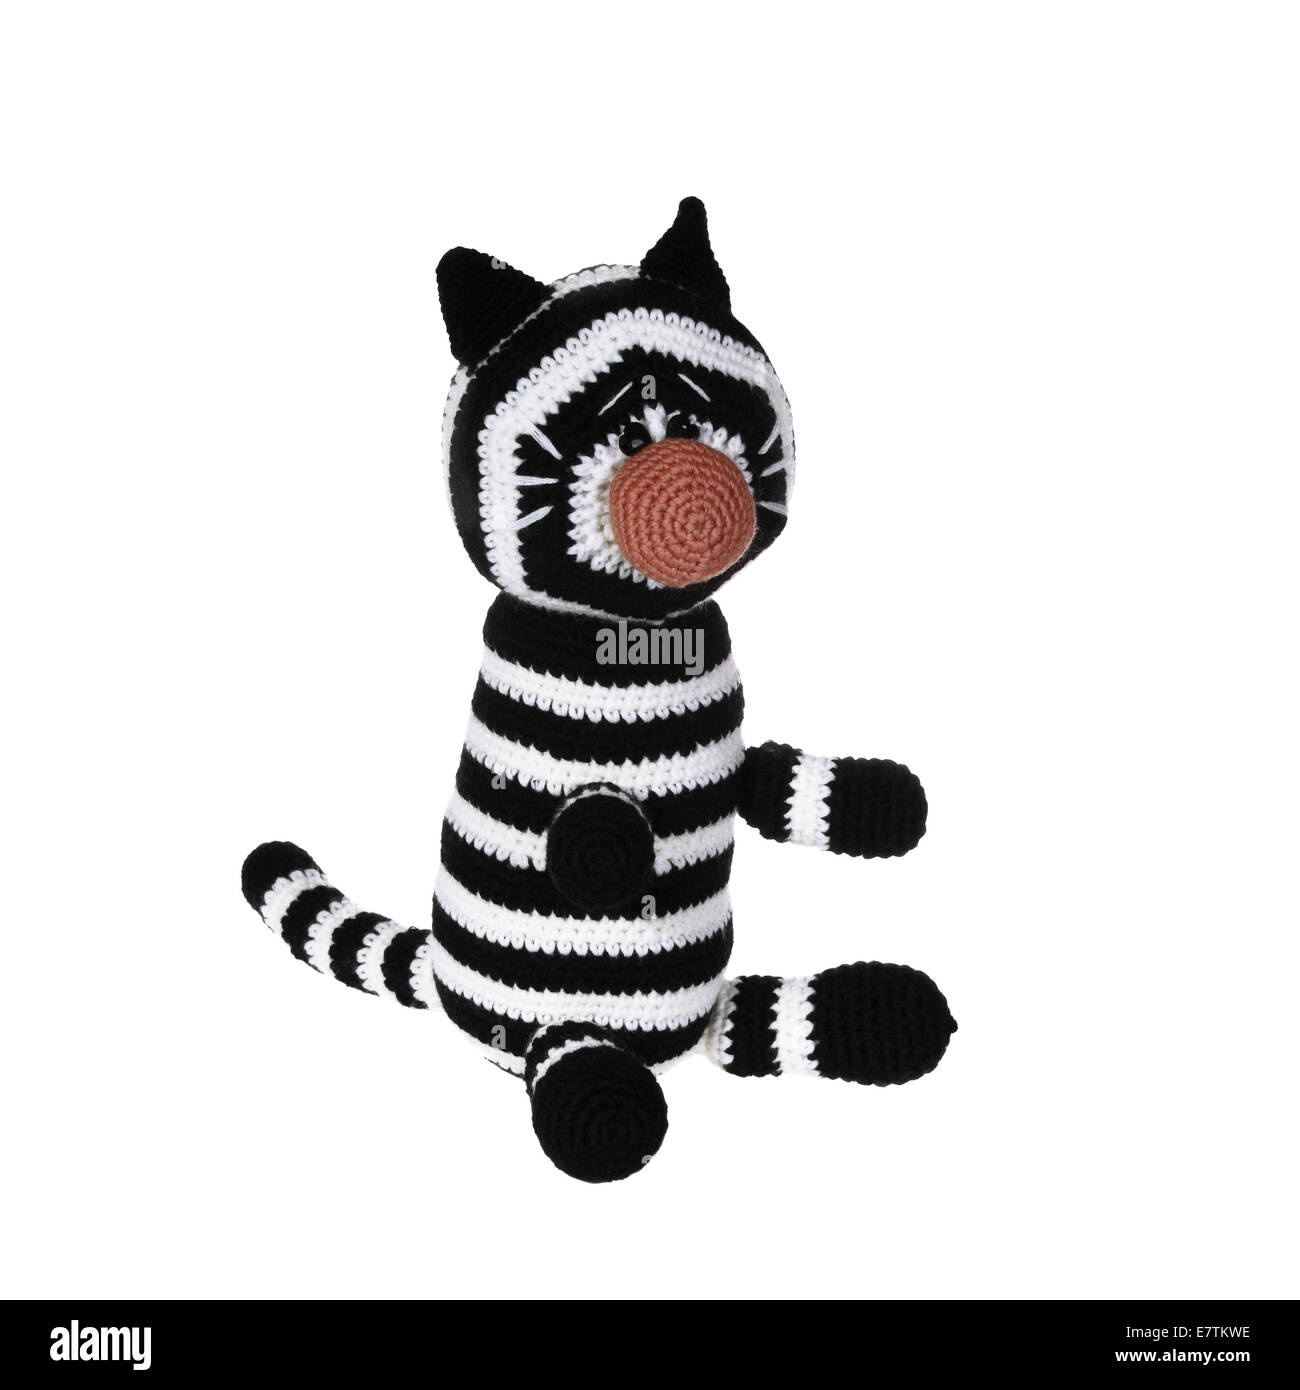 Knitted toy black and white tabby cat isolated on white background Stock Photo